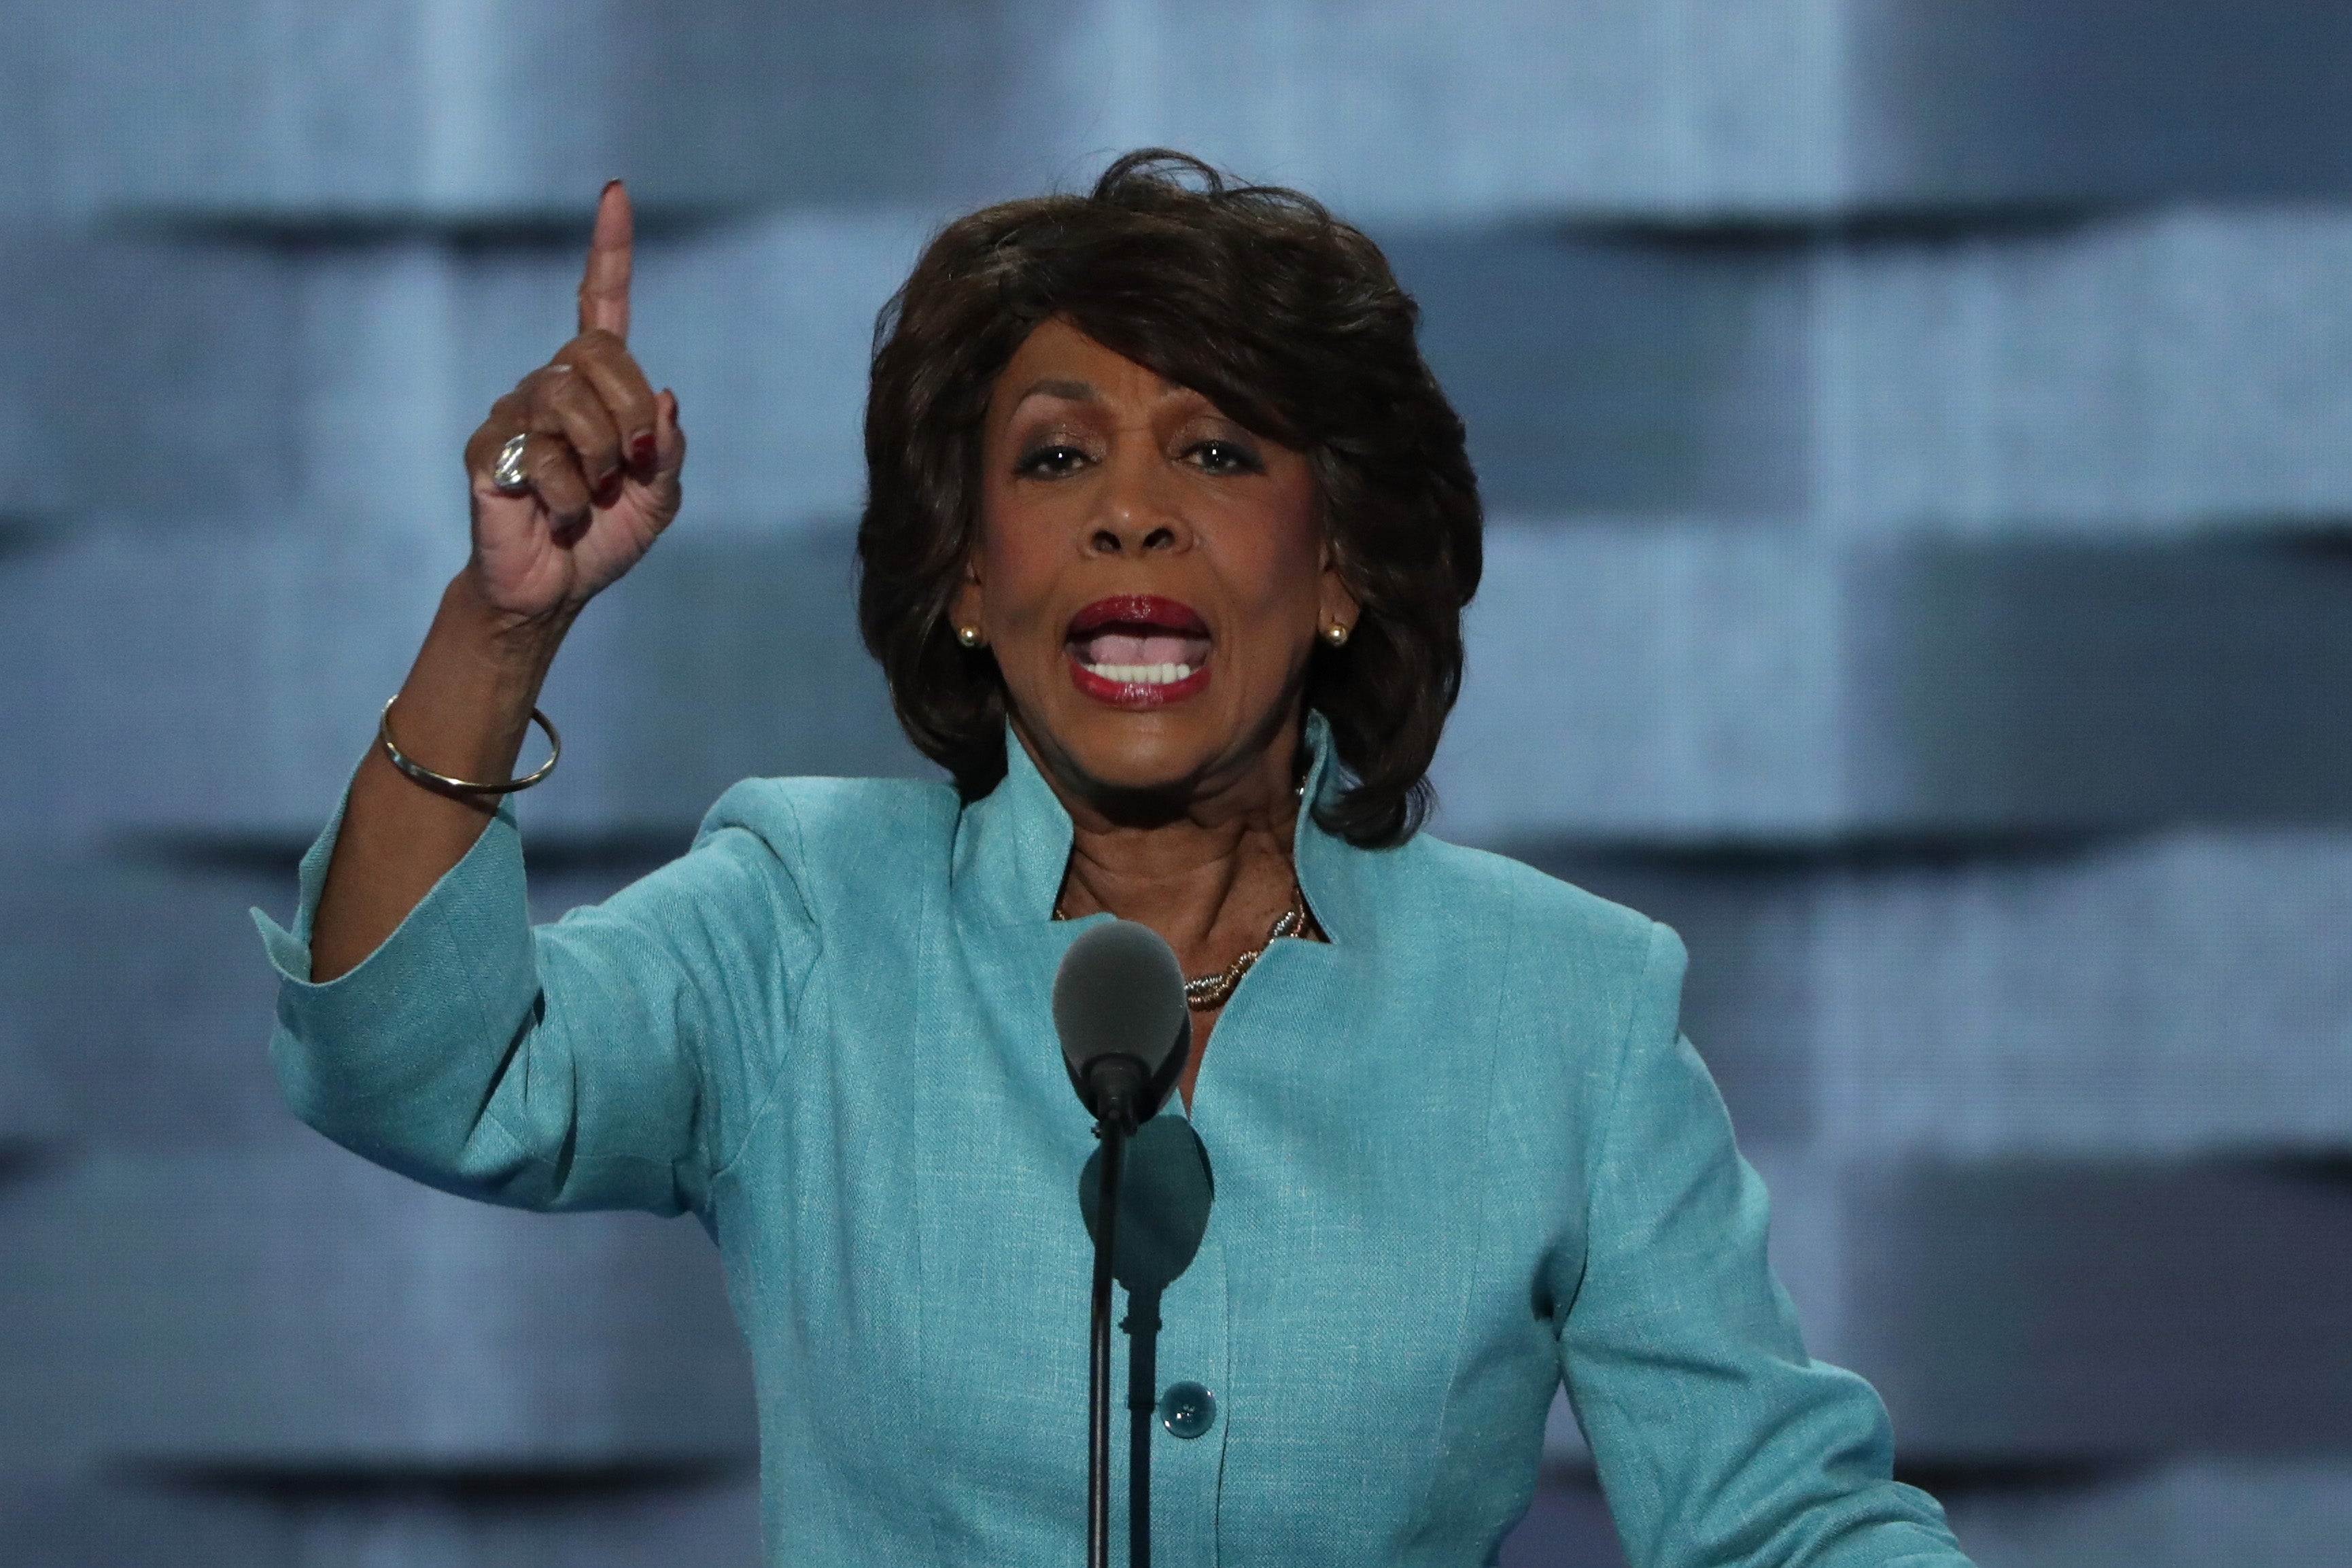 The Quick Read: Maxine Waters Calls For The Public To ‘Push Back’ on Trump Administration 
